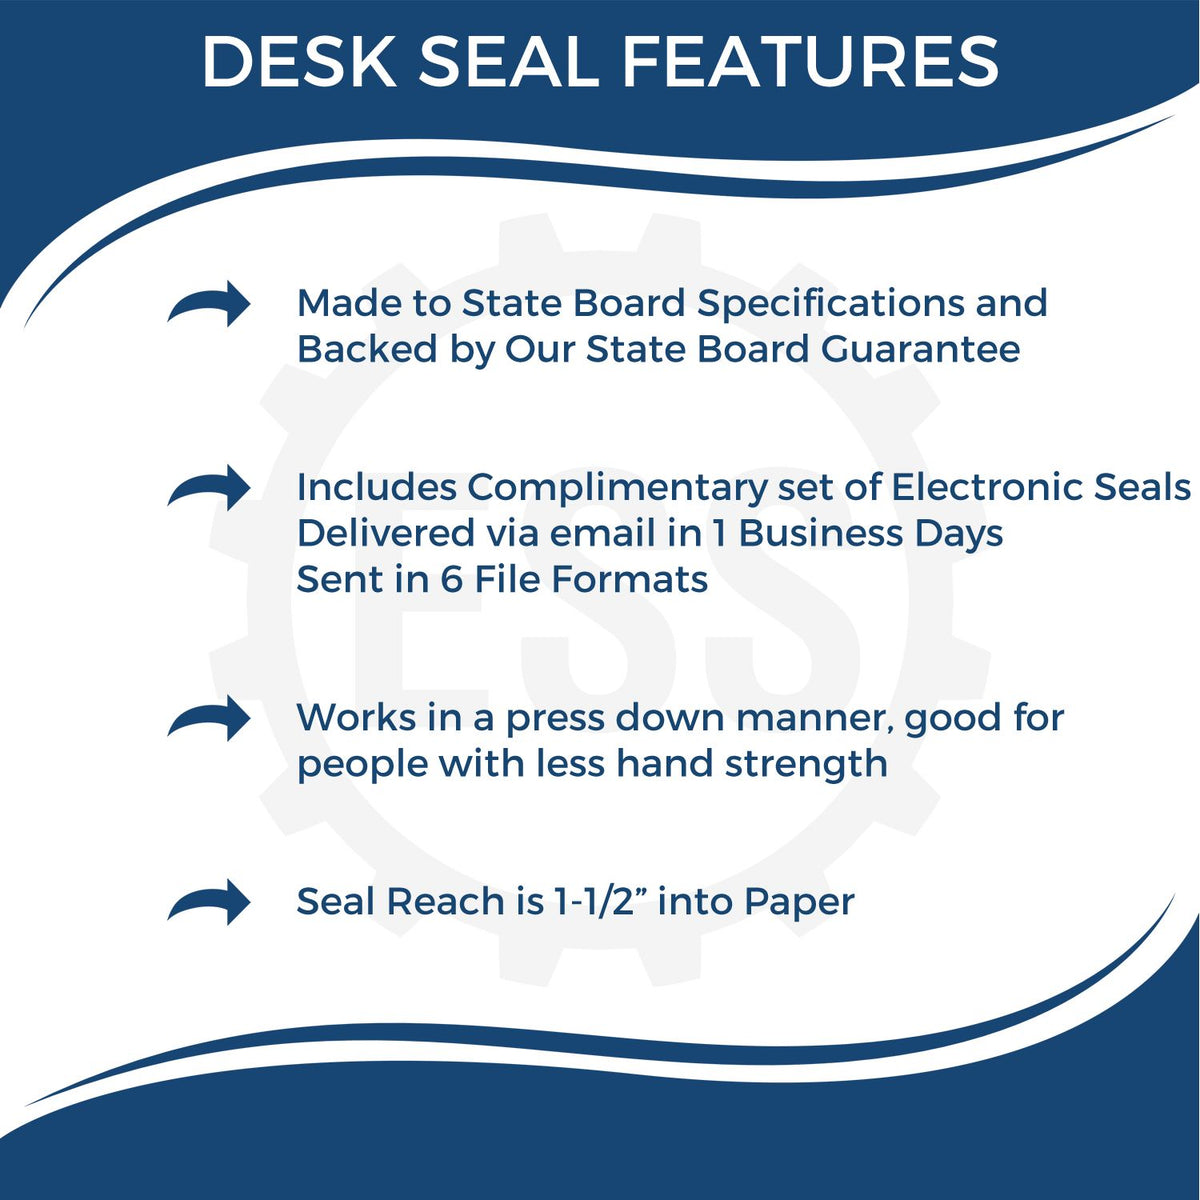 A picture of an infographic highlighting the selling points for the Alabama Desk Architect Embossing Seal